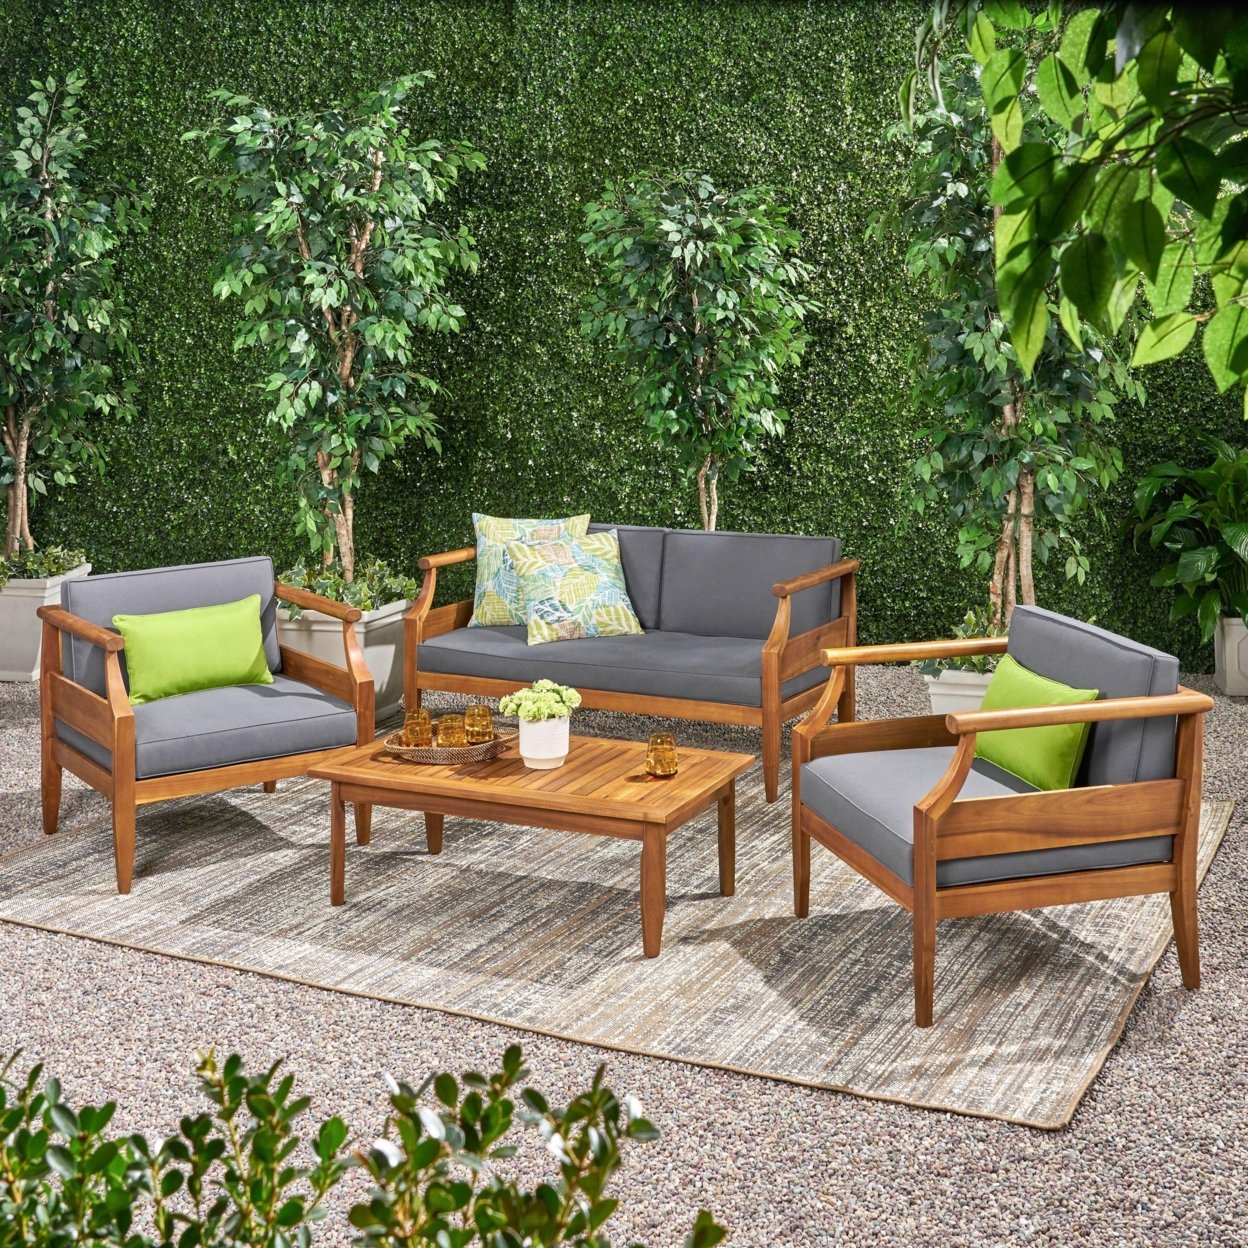 Bianca Outdoor Mid-Century Modern Acacia Wood 4 Seater Chat Set With Cushions - Dark Gray